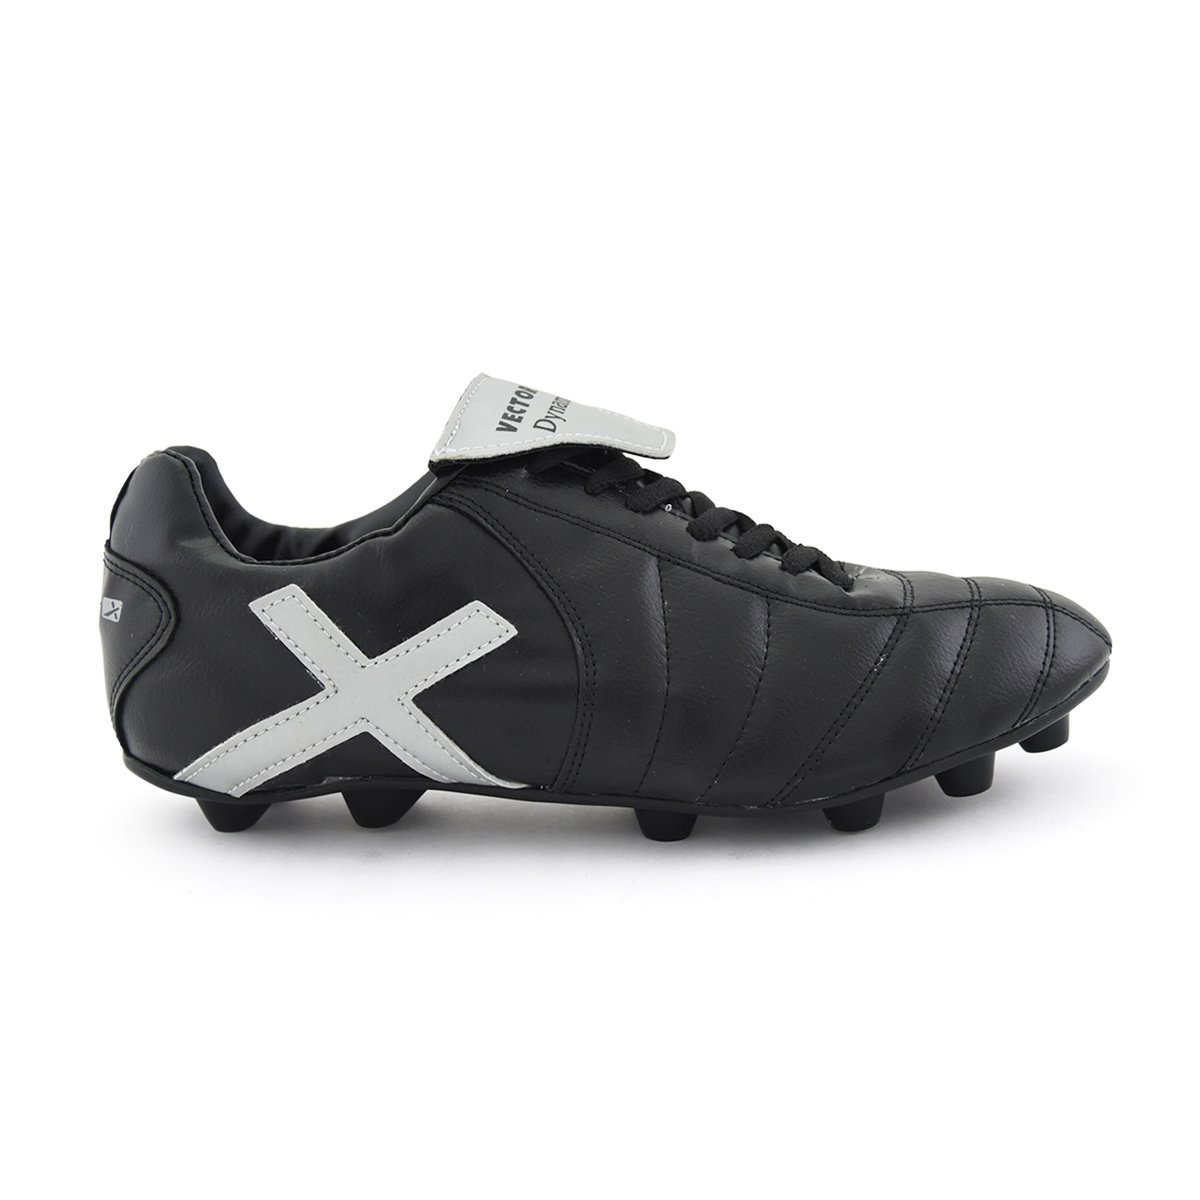 Vector X Dynamic 001 Football Shoes for Men's (Black/Silver)